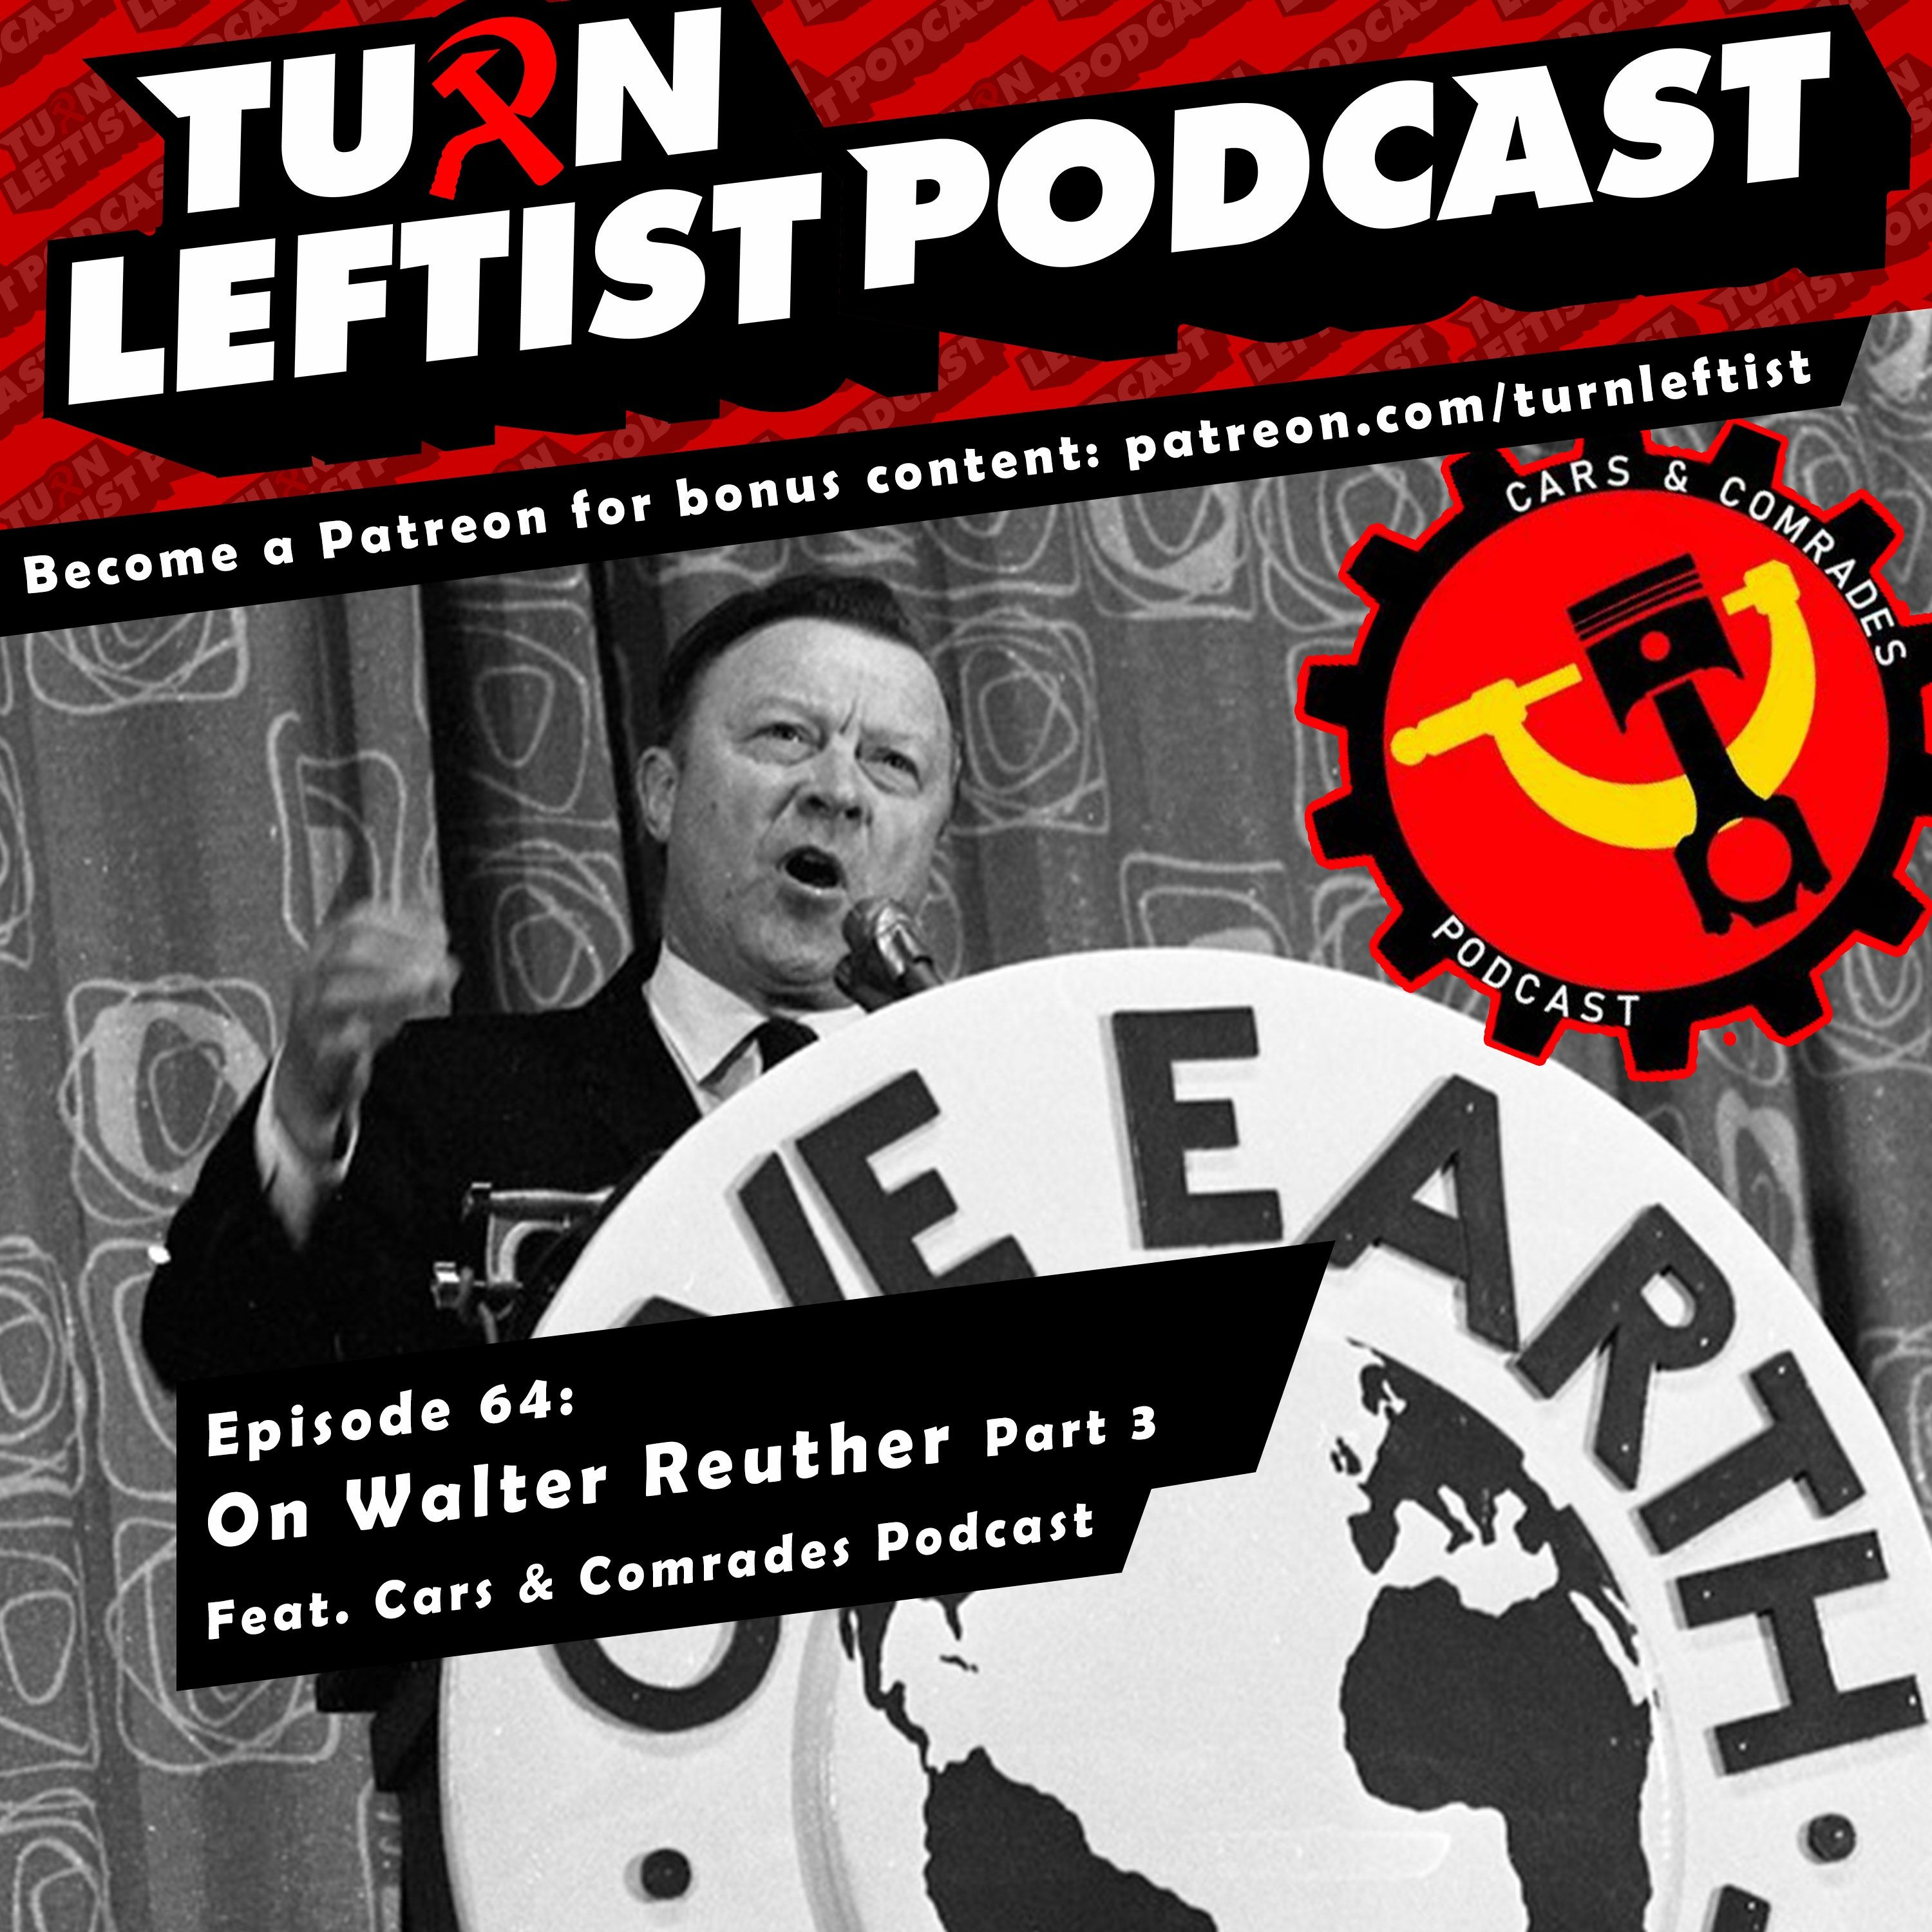 064: On Walter Reuther Part 3 feat. Cars & Comrades Podcast